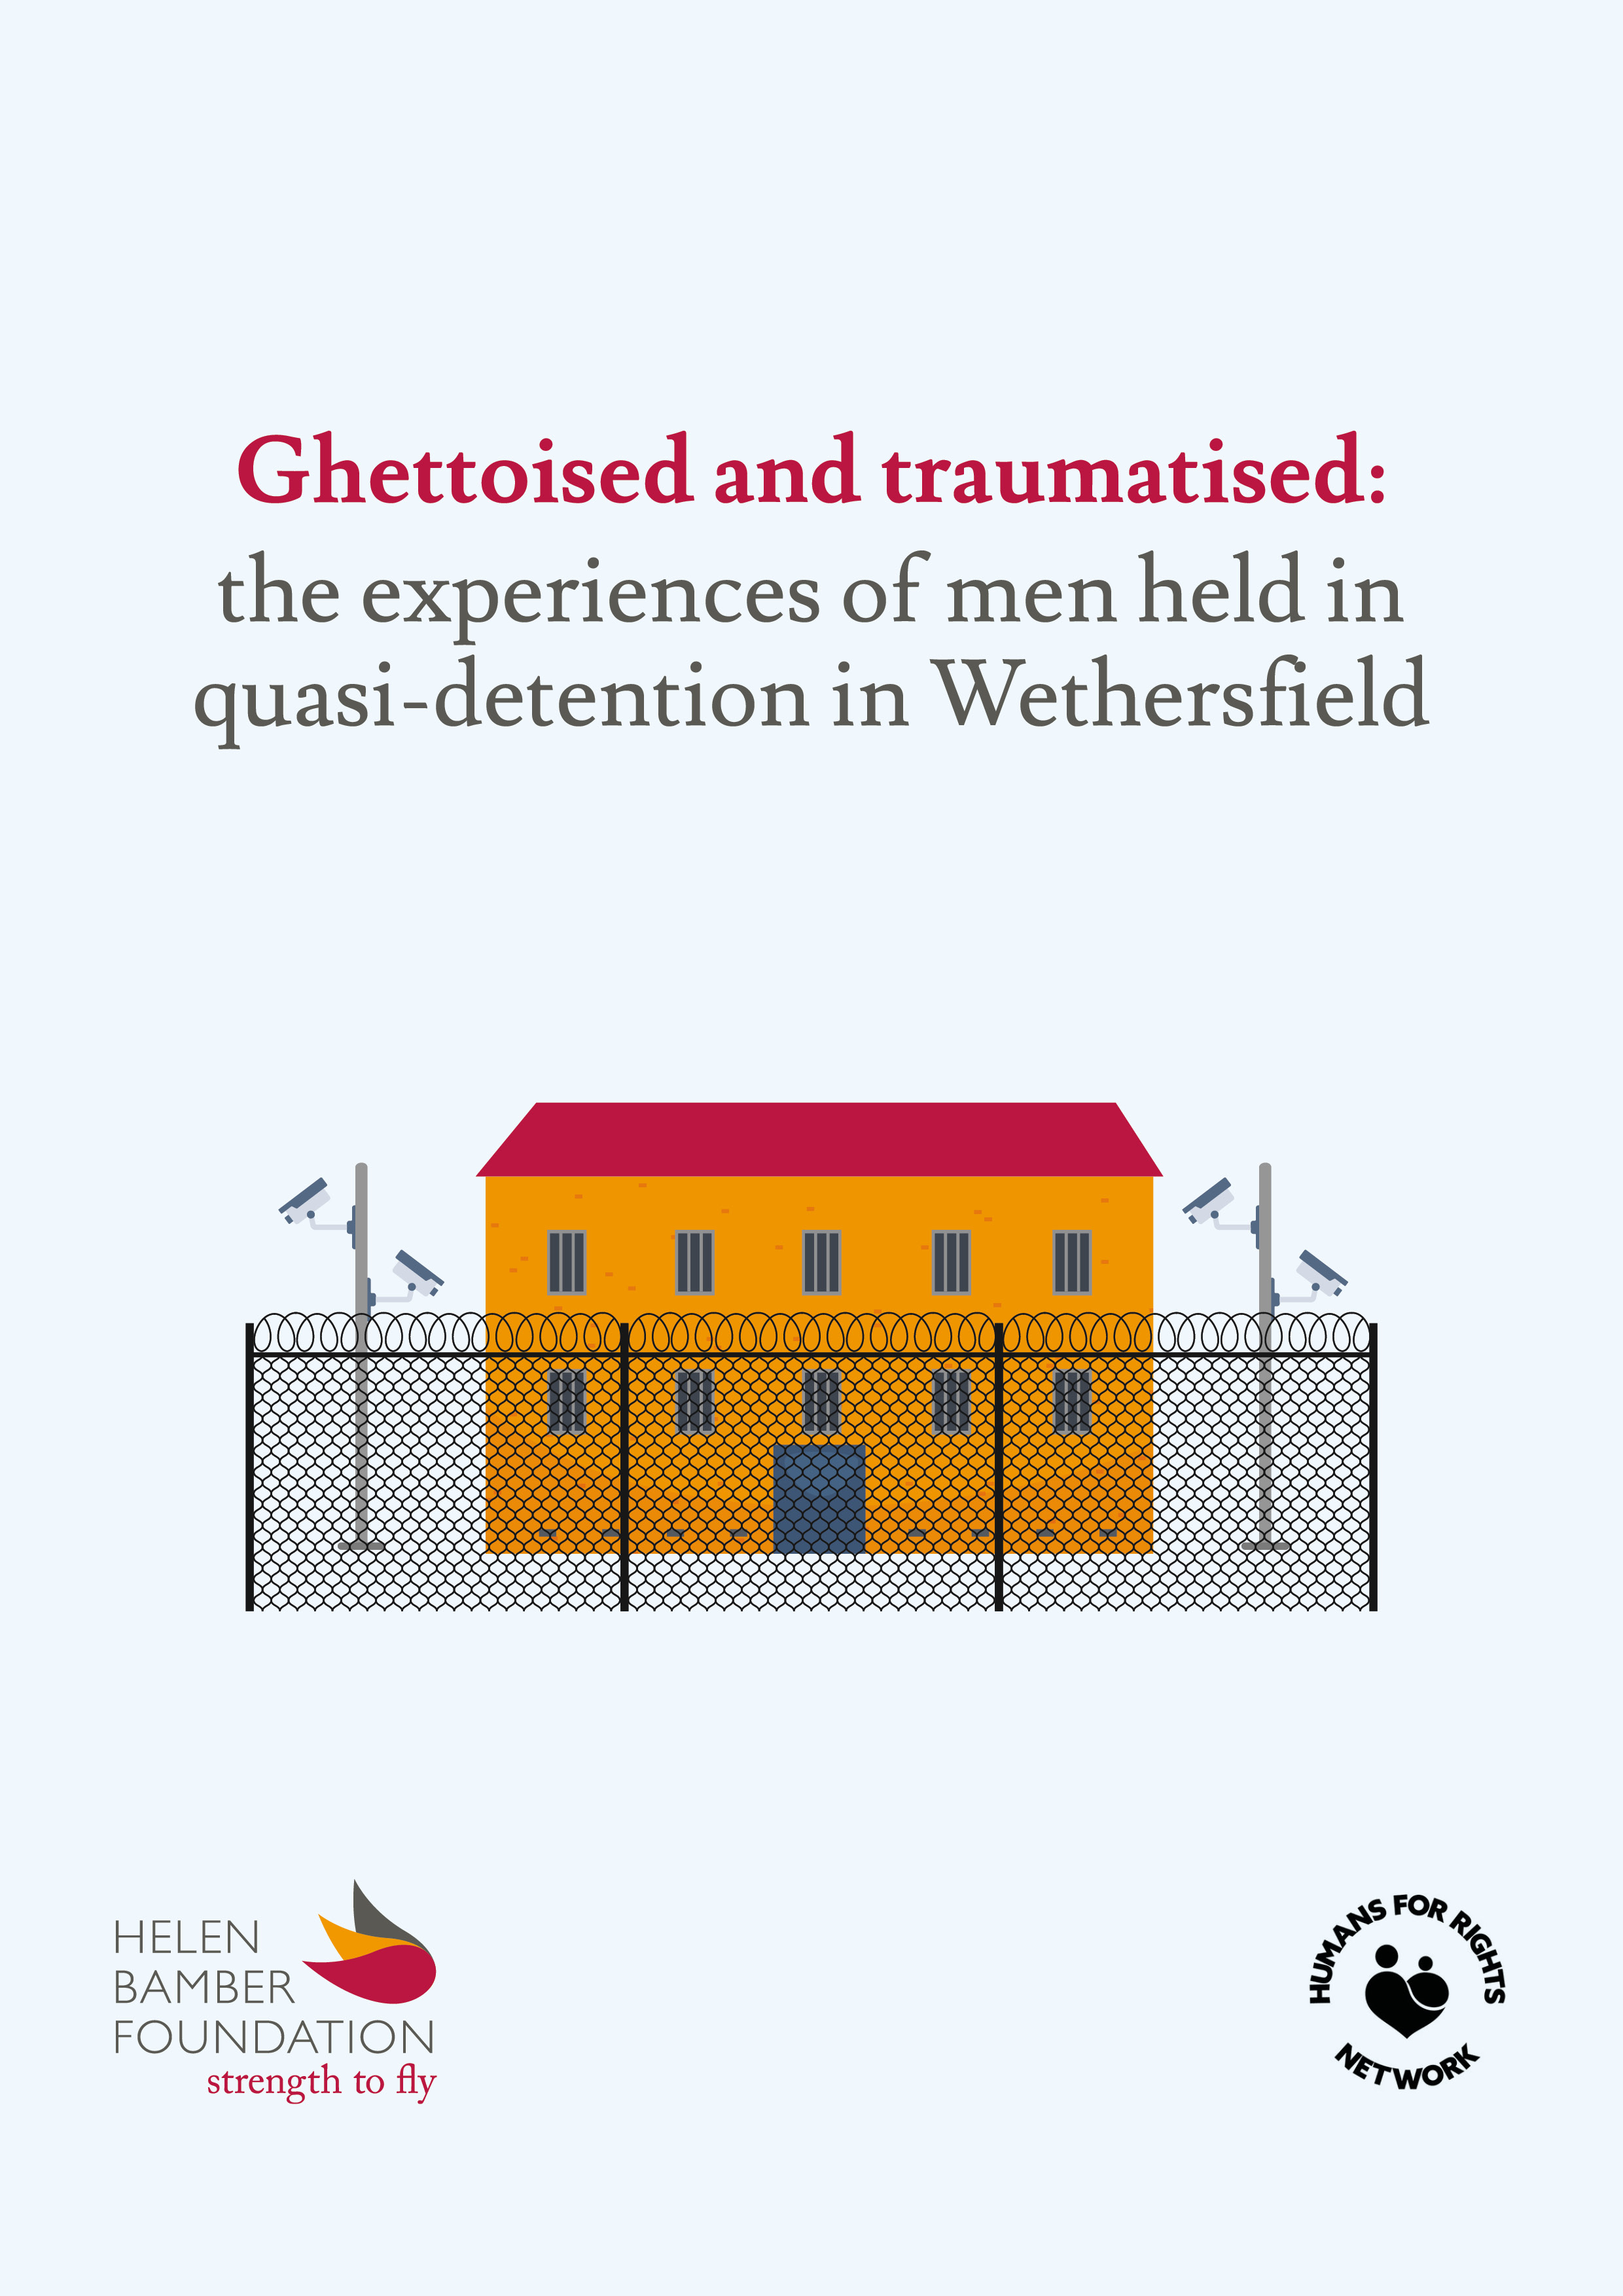 Ghettoised and traumatised: the experiences of men held in quasi-detention in Wethersfield